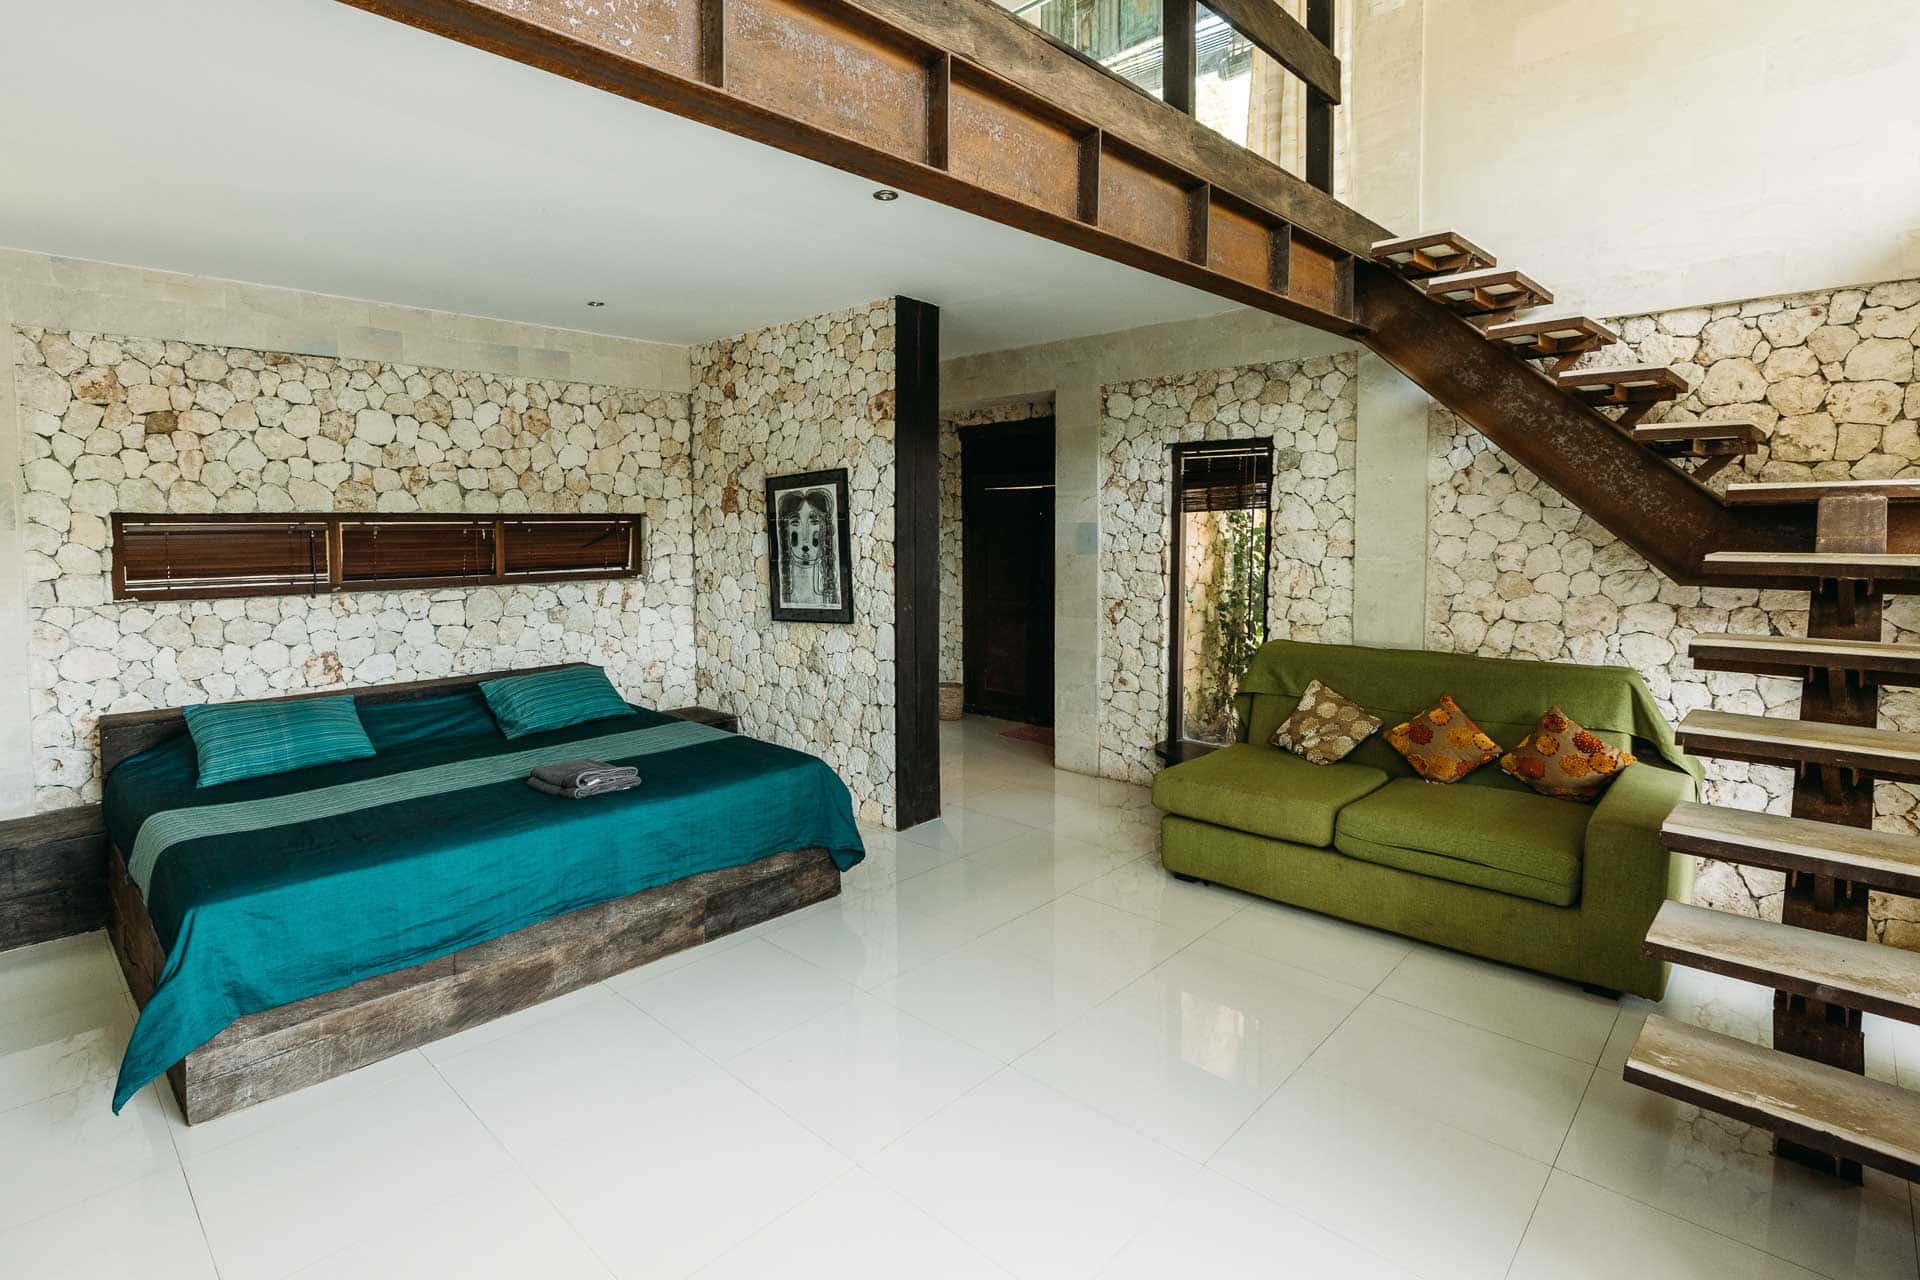 A room in hotel with stones for walls and green sofa and a king-size bed decorated in a rustic way